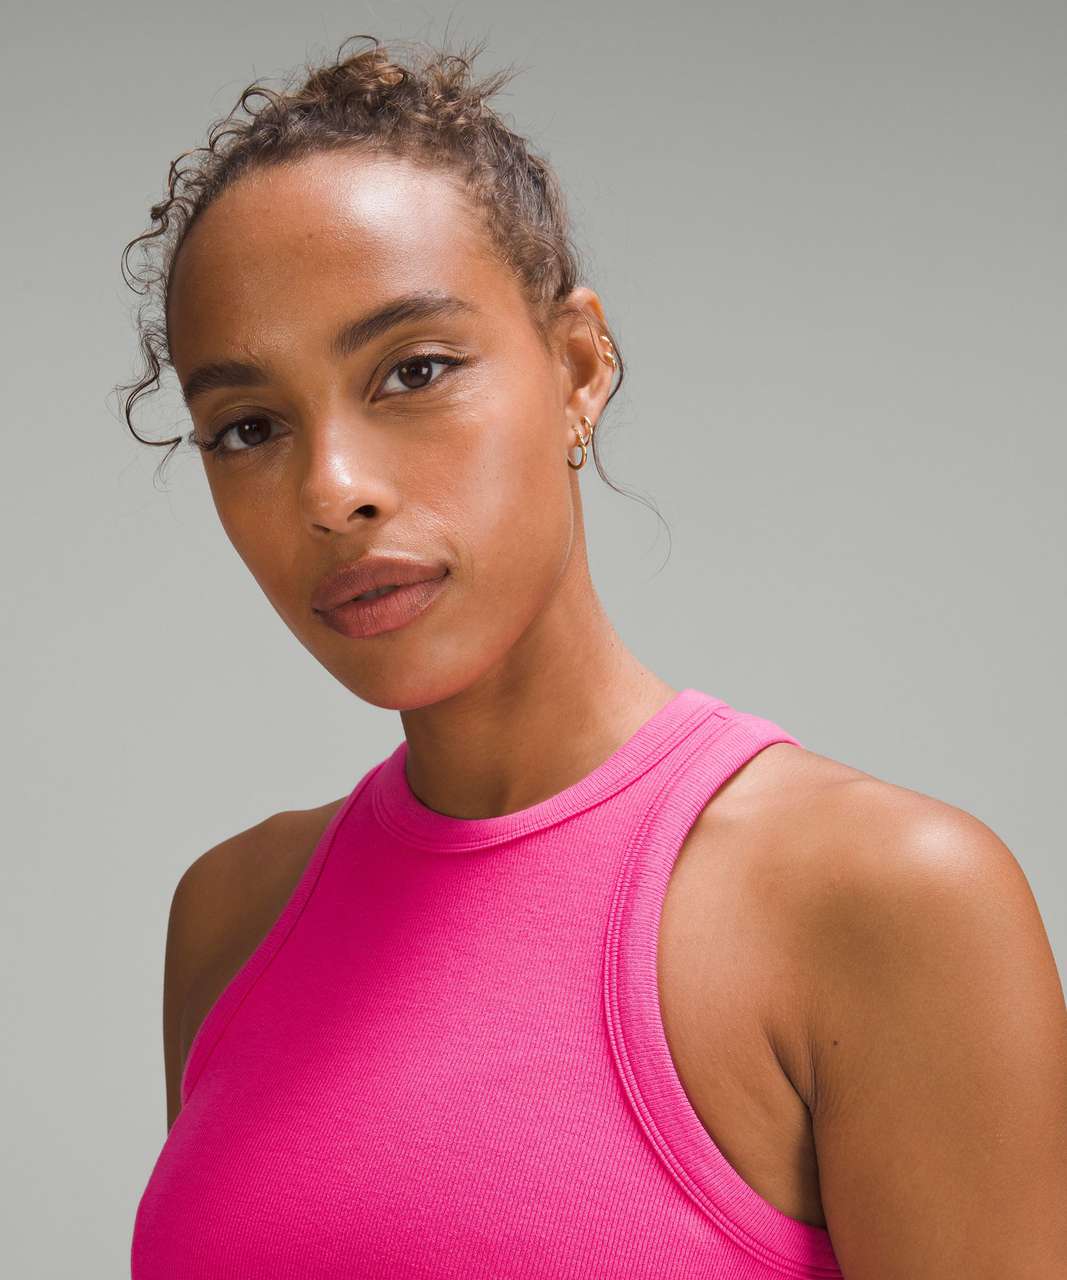 Lululemon Hold Tight Cropped Tank Top - Sonic Pink